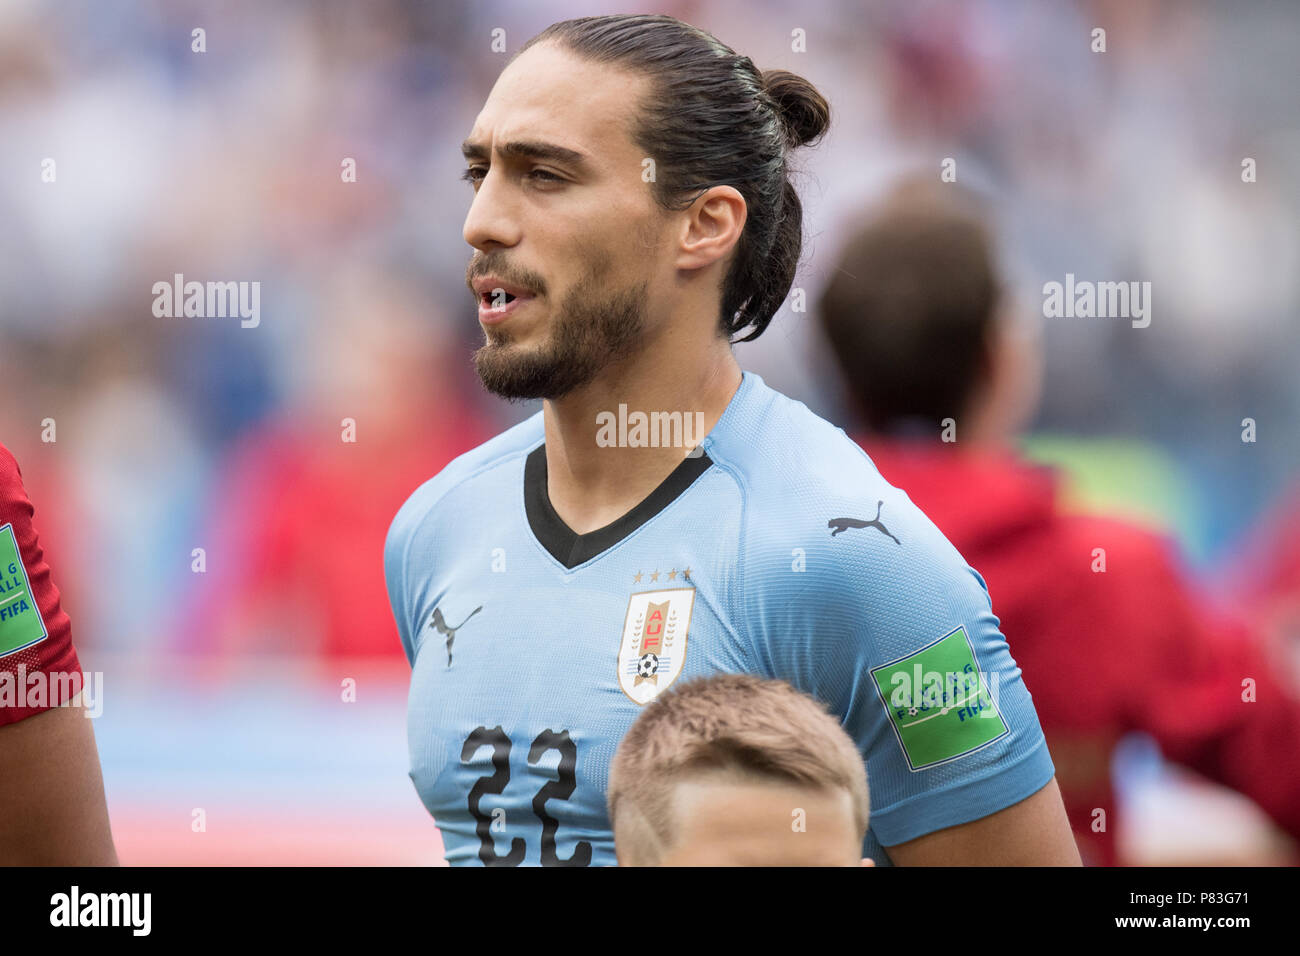 Martin CACERES (URU) during the presentation, presentation, line-up, before the start of the match, ceremony, line up, half-length portrait, Uruguay (URU) - France (FRA) 0-2, quarter-final, match 57, on 06.07.2018 in Nizhny Novgorod; Football World Cup 2018 in Russia from 14.06. - 15.07.2018. | usage worldwide Stock Photo